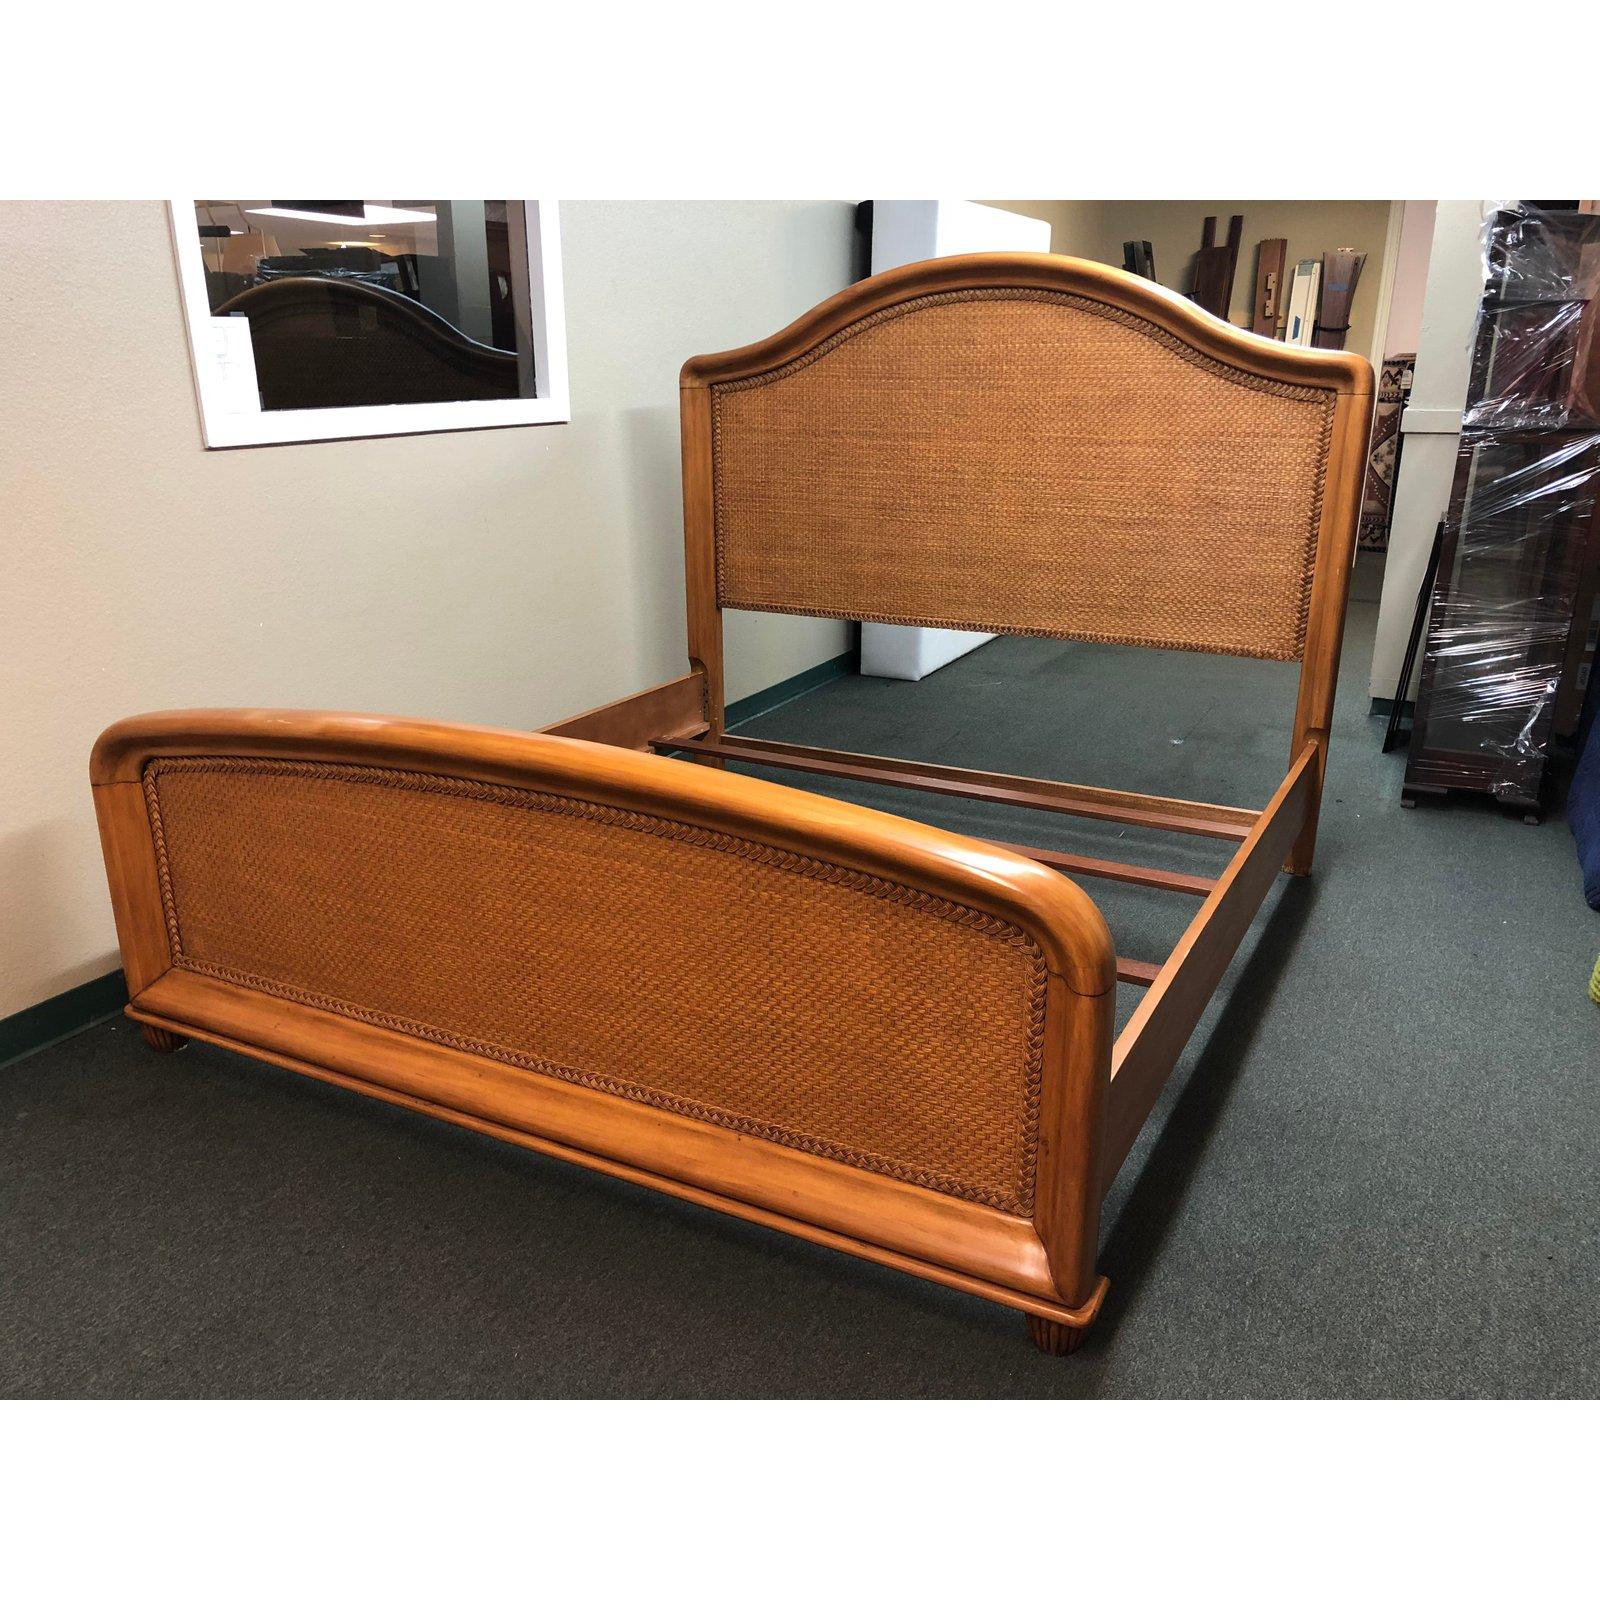 An Eastern king bed, by Tommy Bahama for Lexington Home. Lovely woven cane is surrounded by a solid curving frame inset with braided cane, for style and substance. Two of four slats have center support. Surface damage, scratch as shown.

Extra